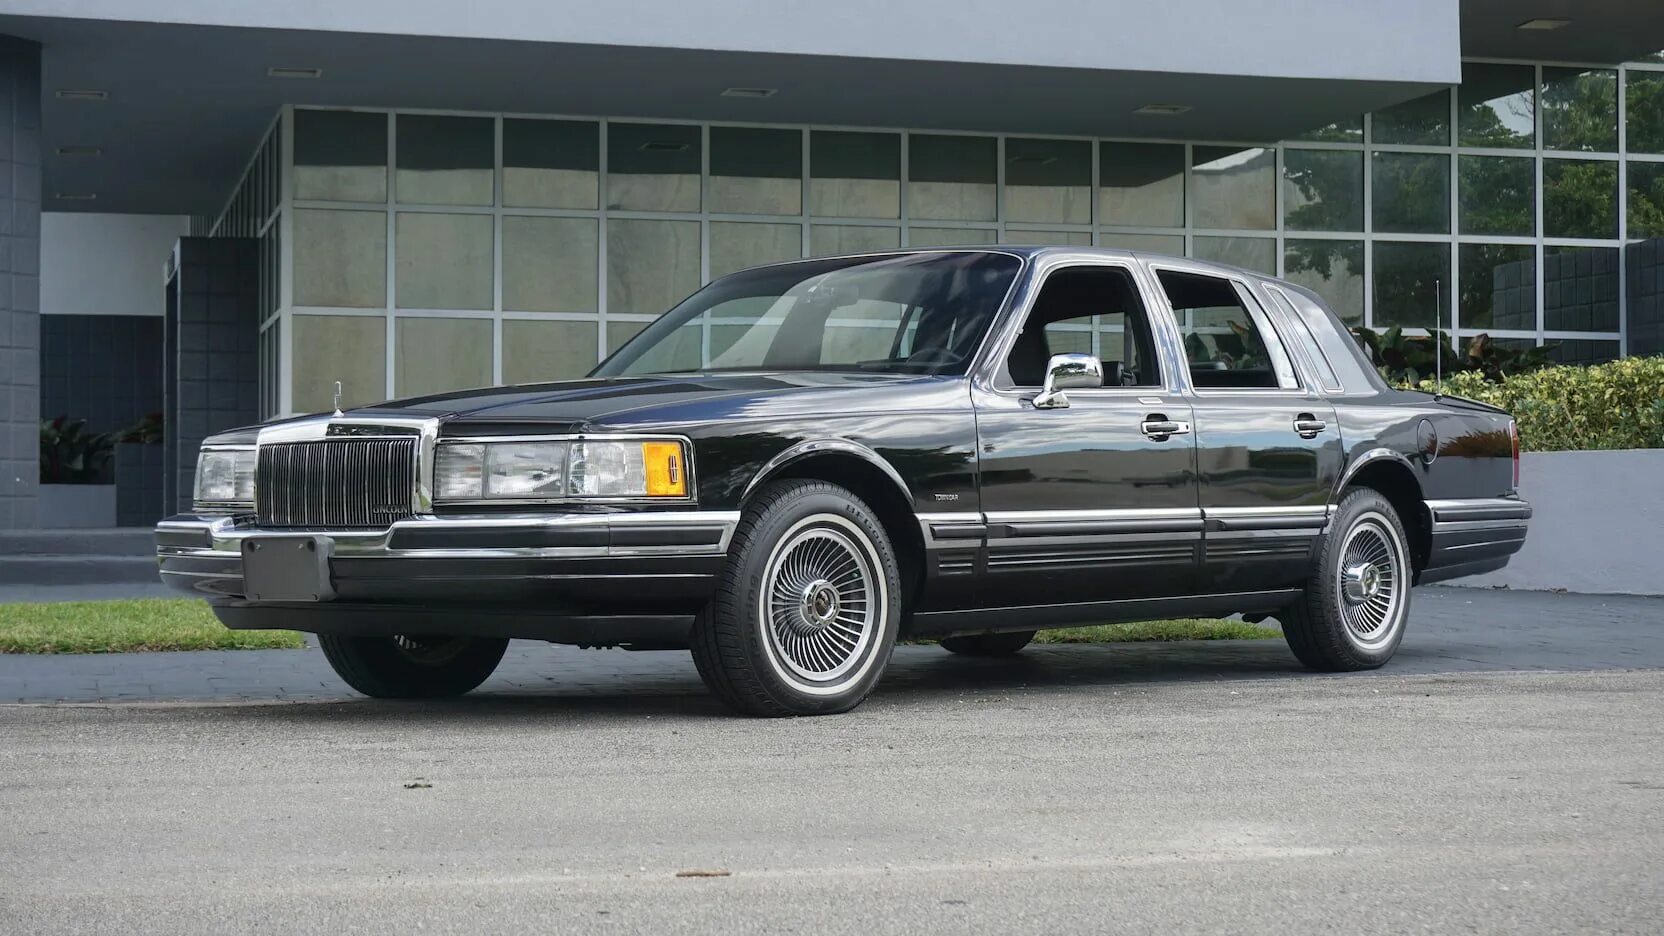 Таун кар 2. Lincoln Town car 1990. Lincoln Town car 1990-1997. Lincoln Town car 2 1990. Lincoln Town car 1998.